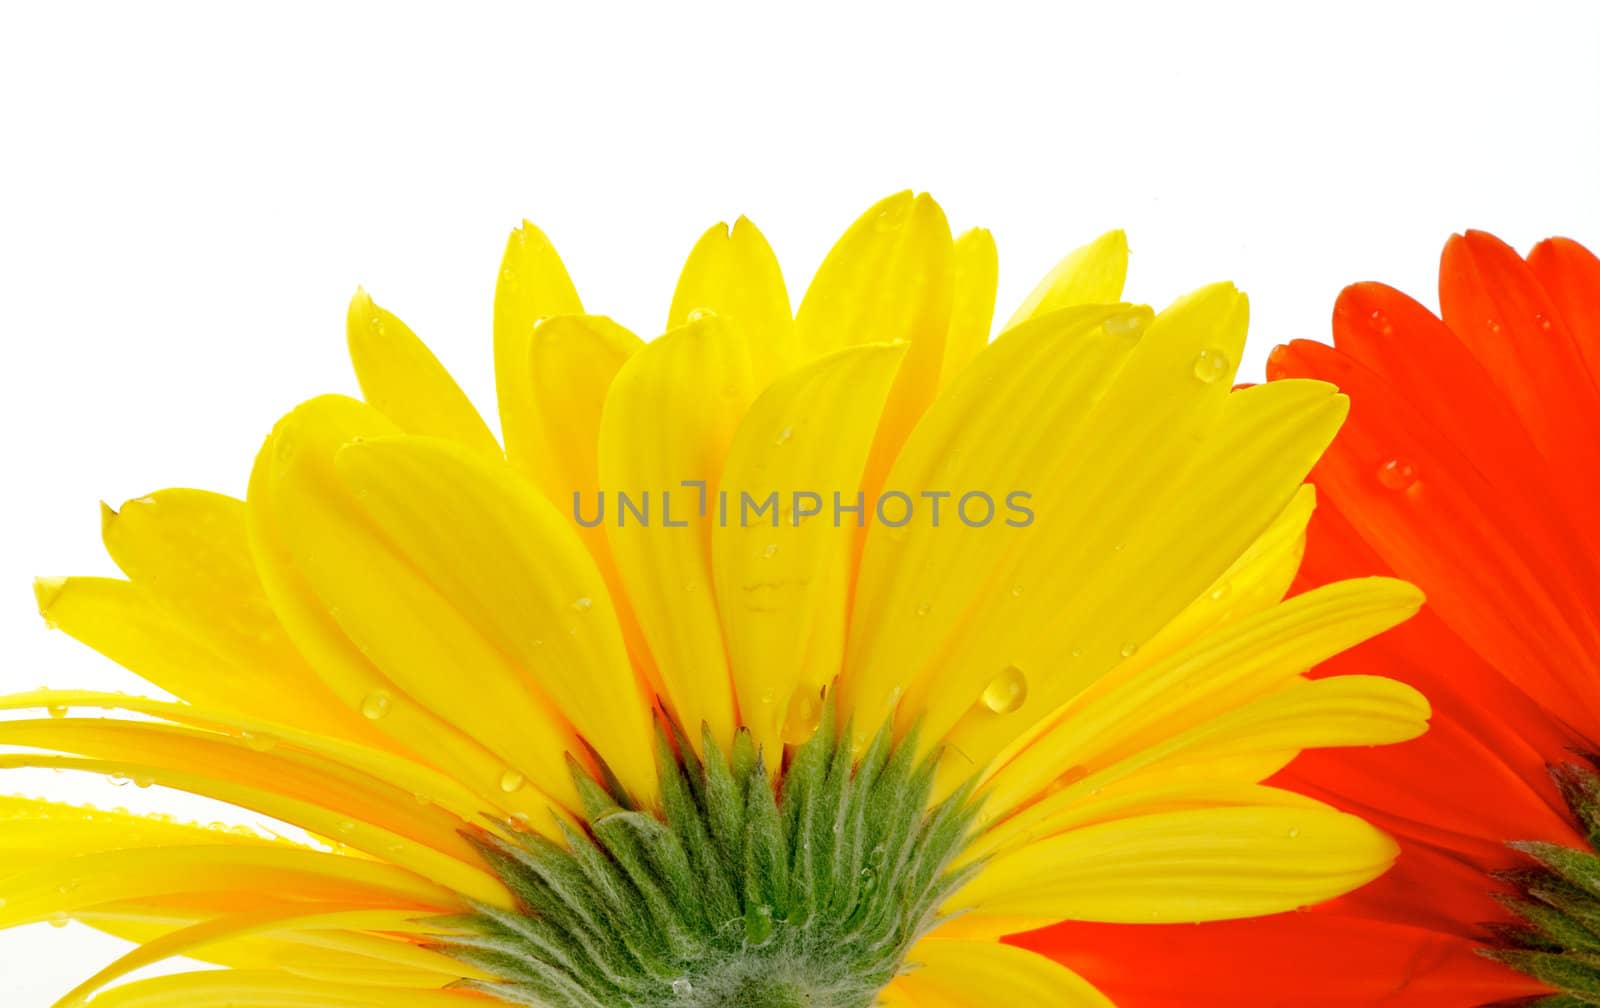 Yellow and red gerbera with water droplets view from under isolated on white background